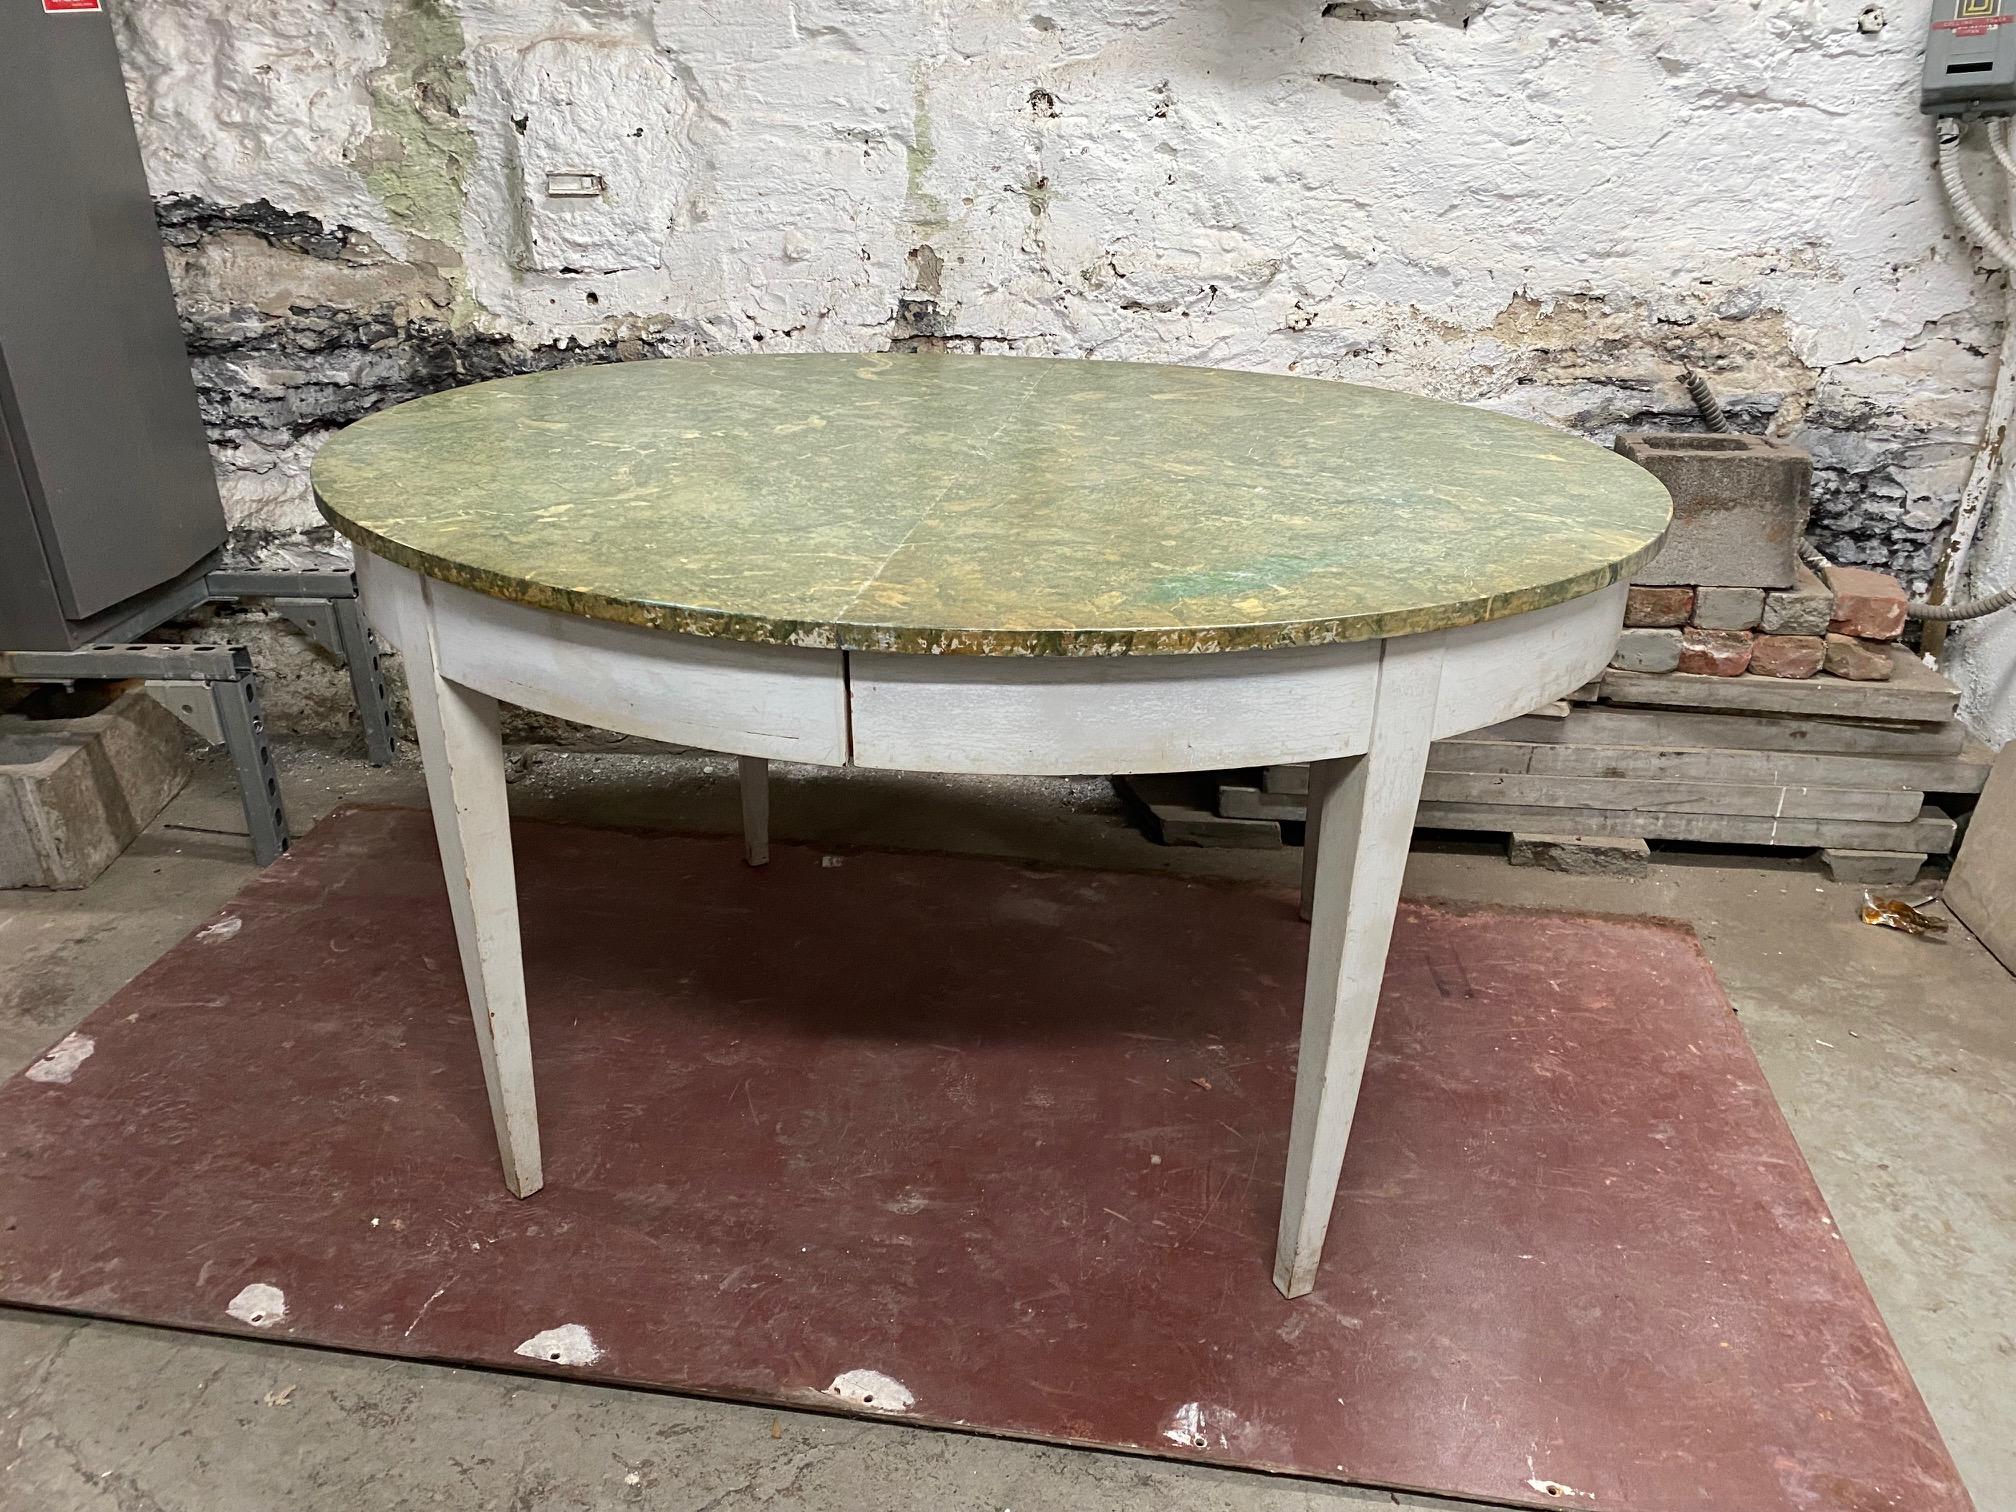 Extending Gustavian style painted wood dining table with faux marble Antico Verde top finish resting on tapered legs. When fully extended 120 inches. There is 3 extensions: 1 x 13.5 inches and 2 x 26 inches.